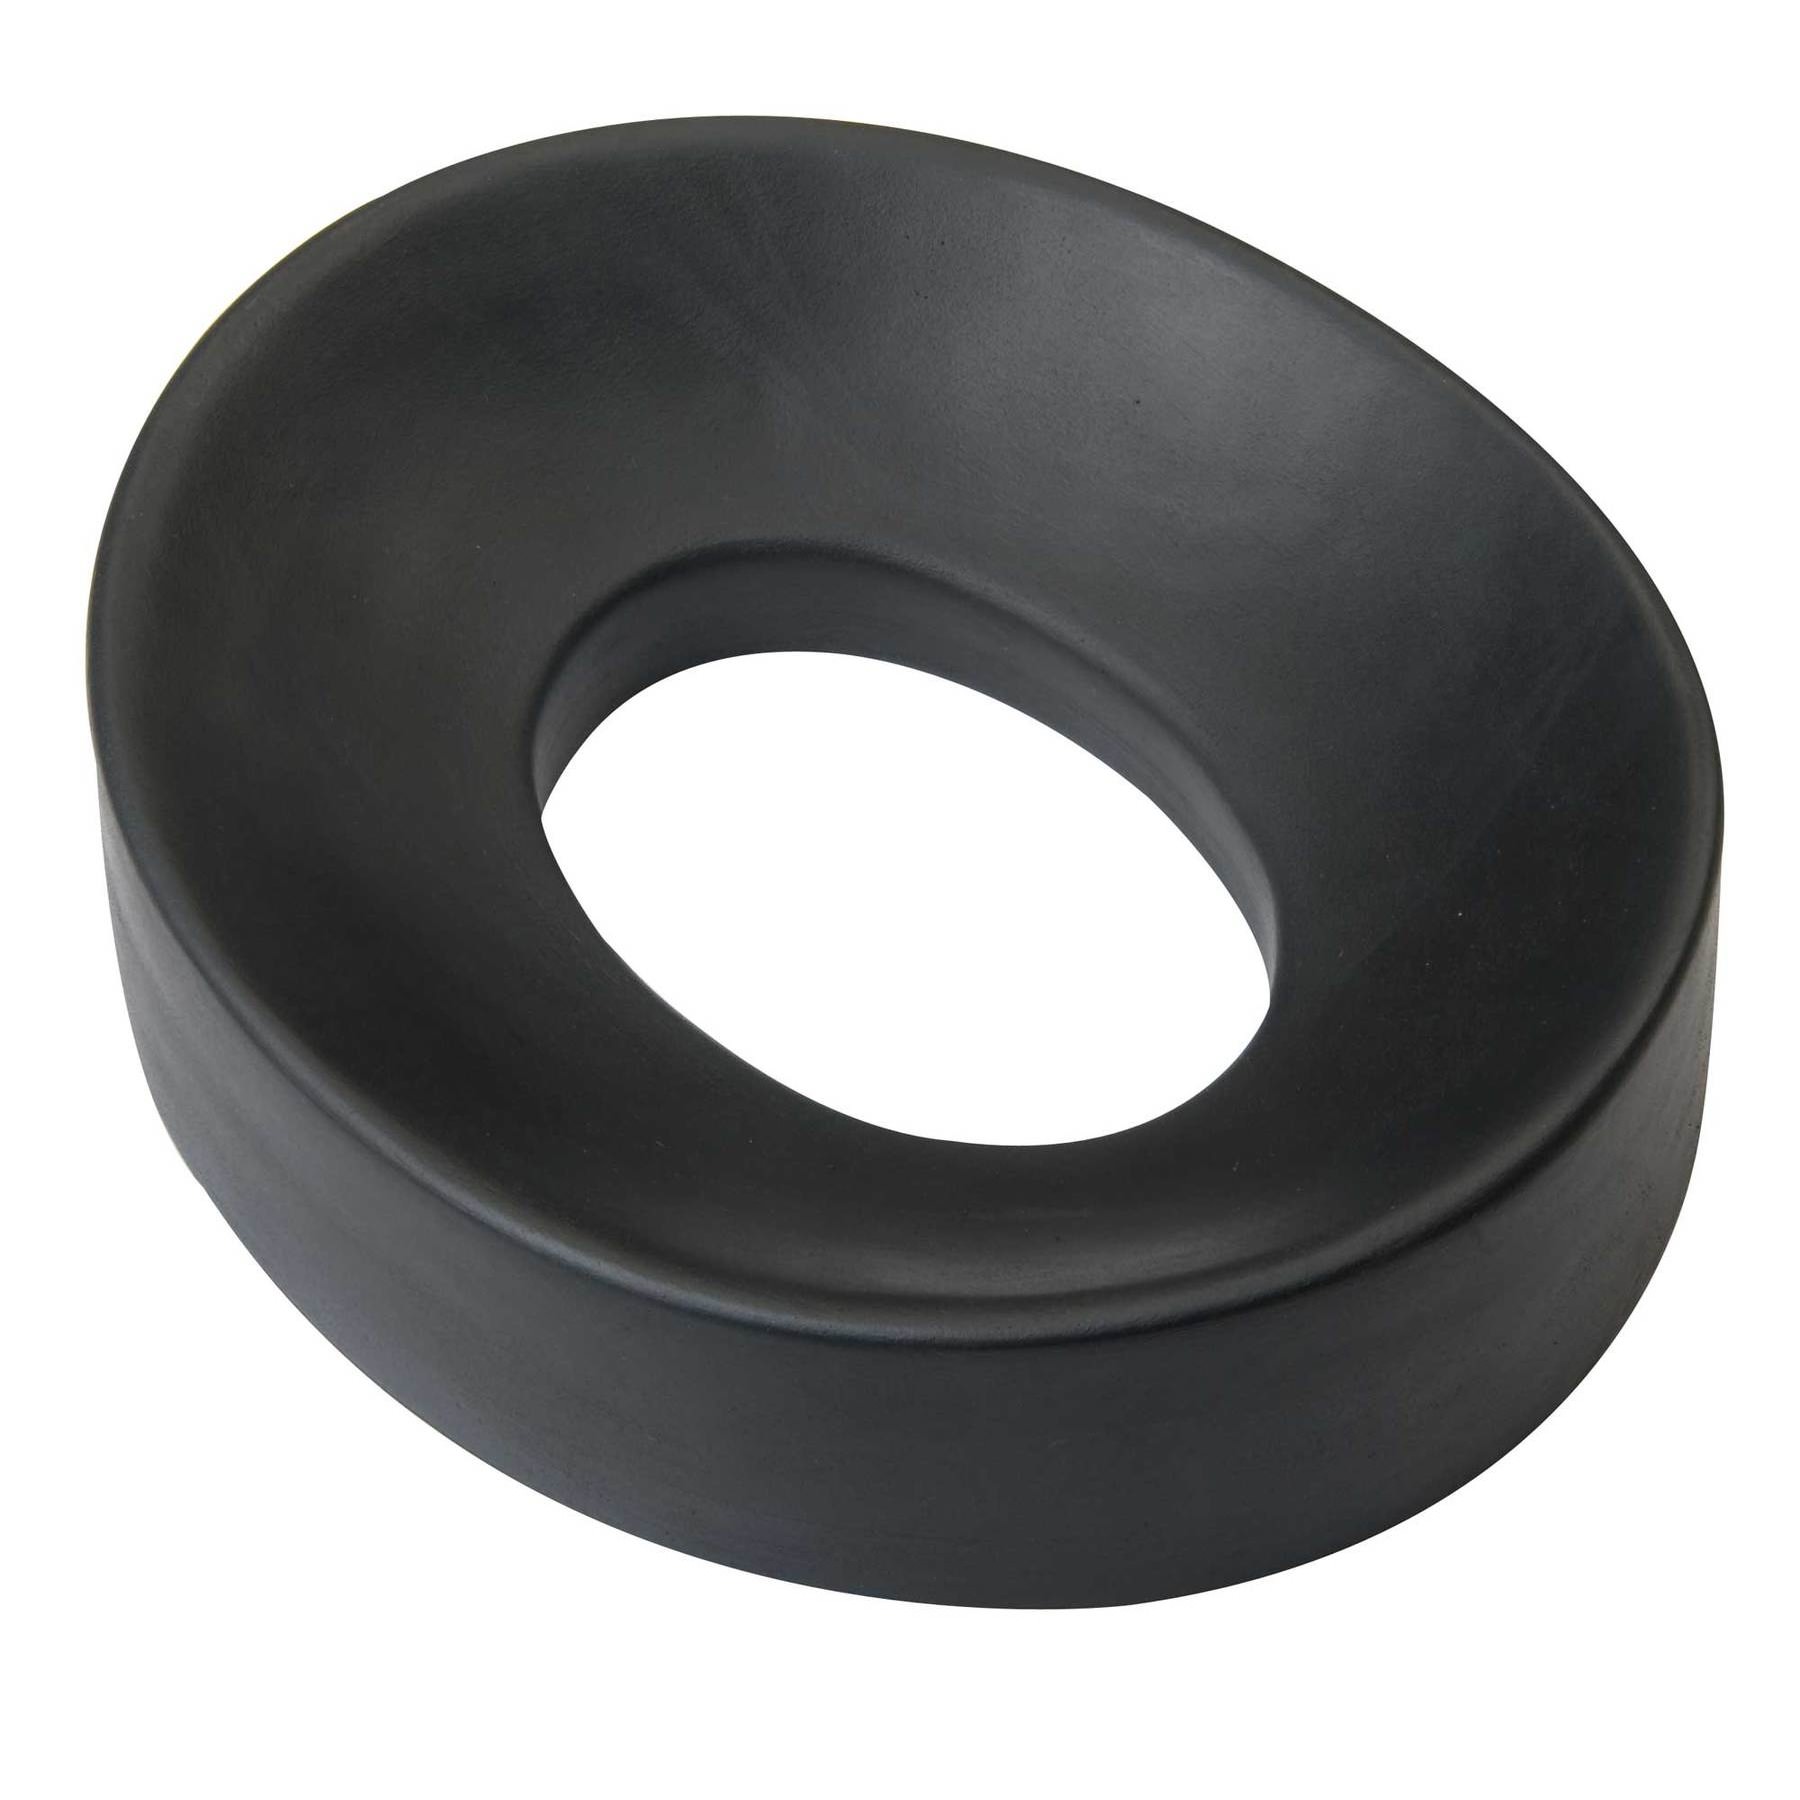 Buy Rubber Ring Helmet Stand | Louis motorcycle clothing and technology